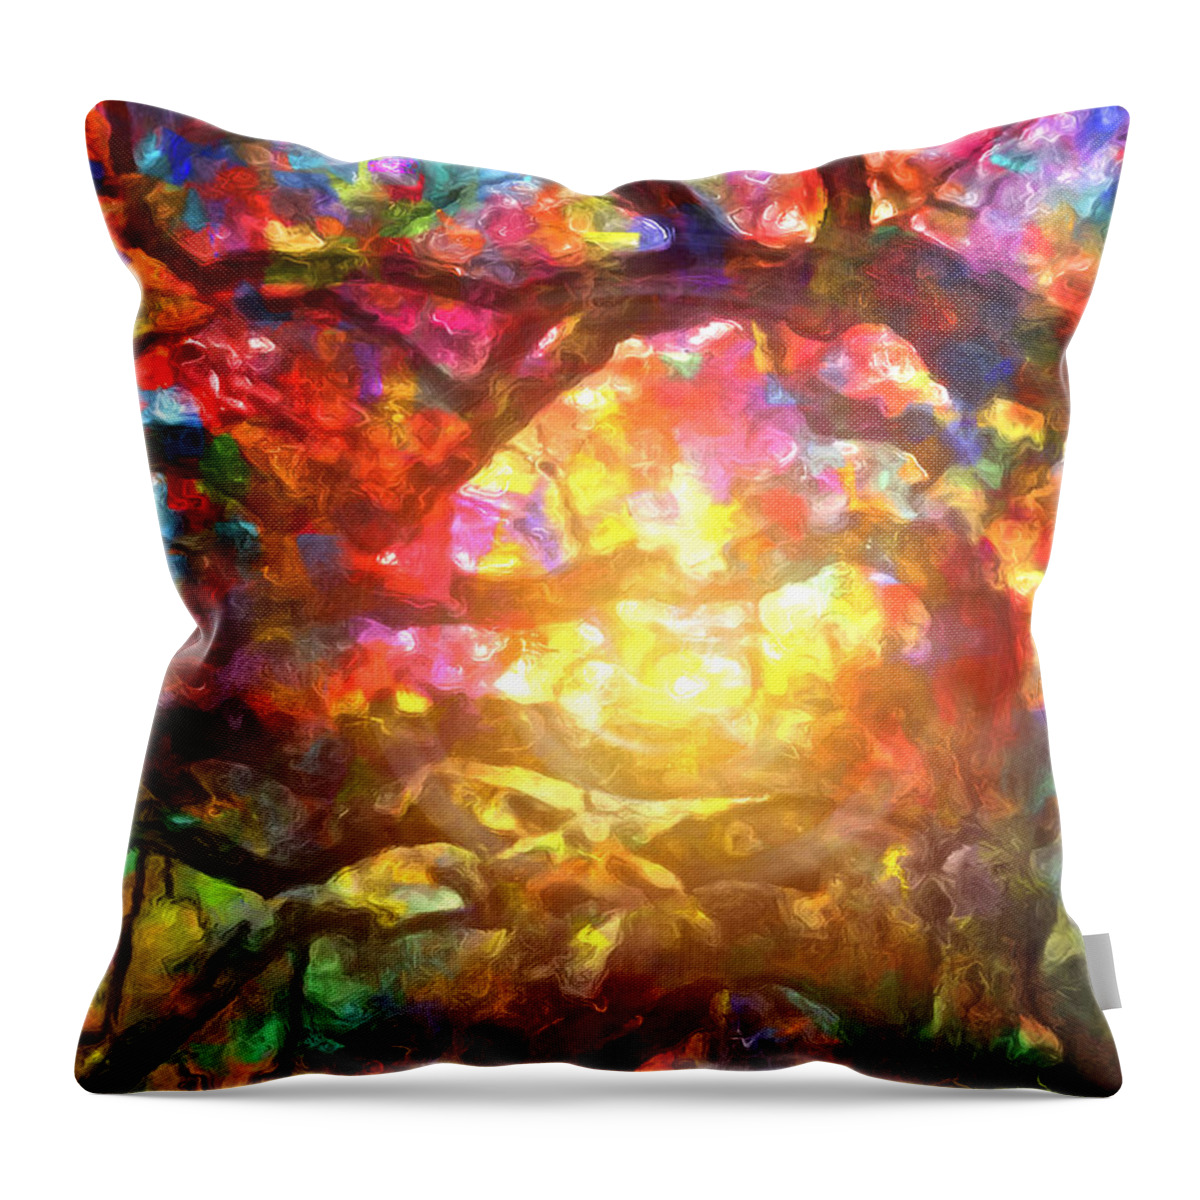 Magical Forest Light Painting Throw Pillow featuring the painting Magical Forest Light Painting by Dan Sproul